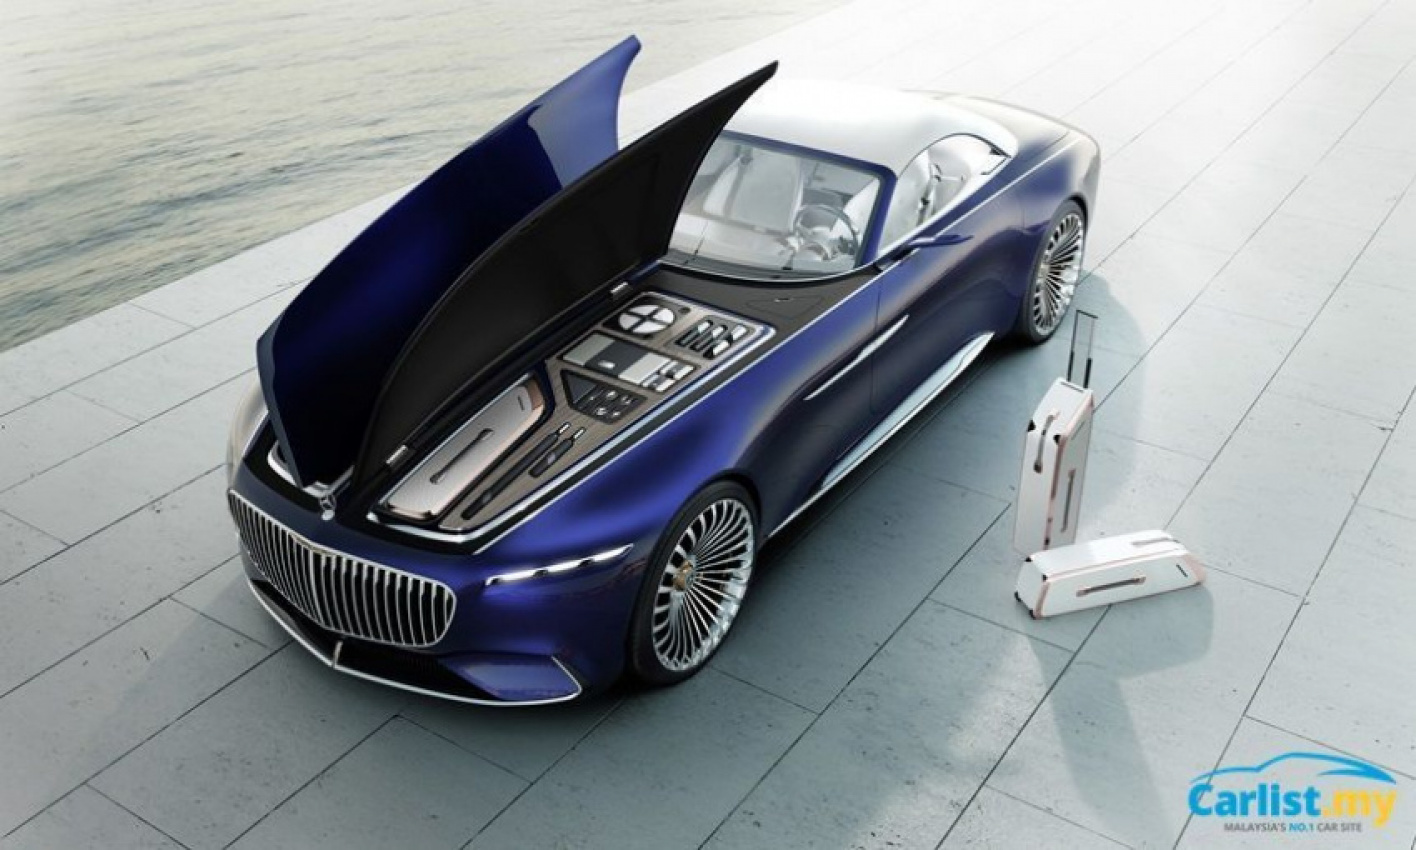 autos, cars, maybach, mercedes-benz, auto news, cabriolet, mercedes, mercedes-maybach, vision 6, vision mercedes-maybach 6 cabriolet, vision mercedes-maybach 6 cabriolet revealed – next-level luxury, full-ev